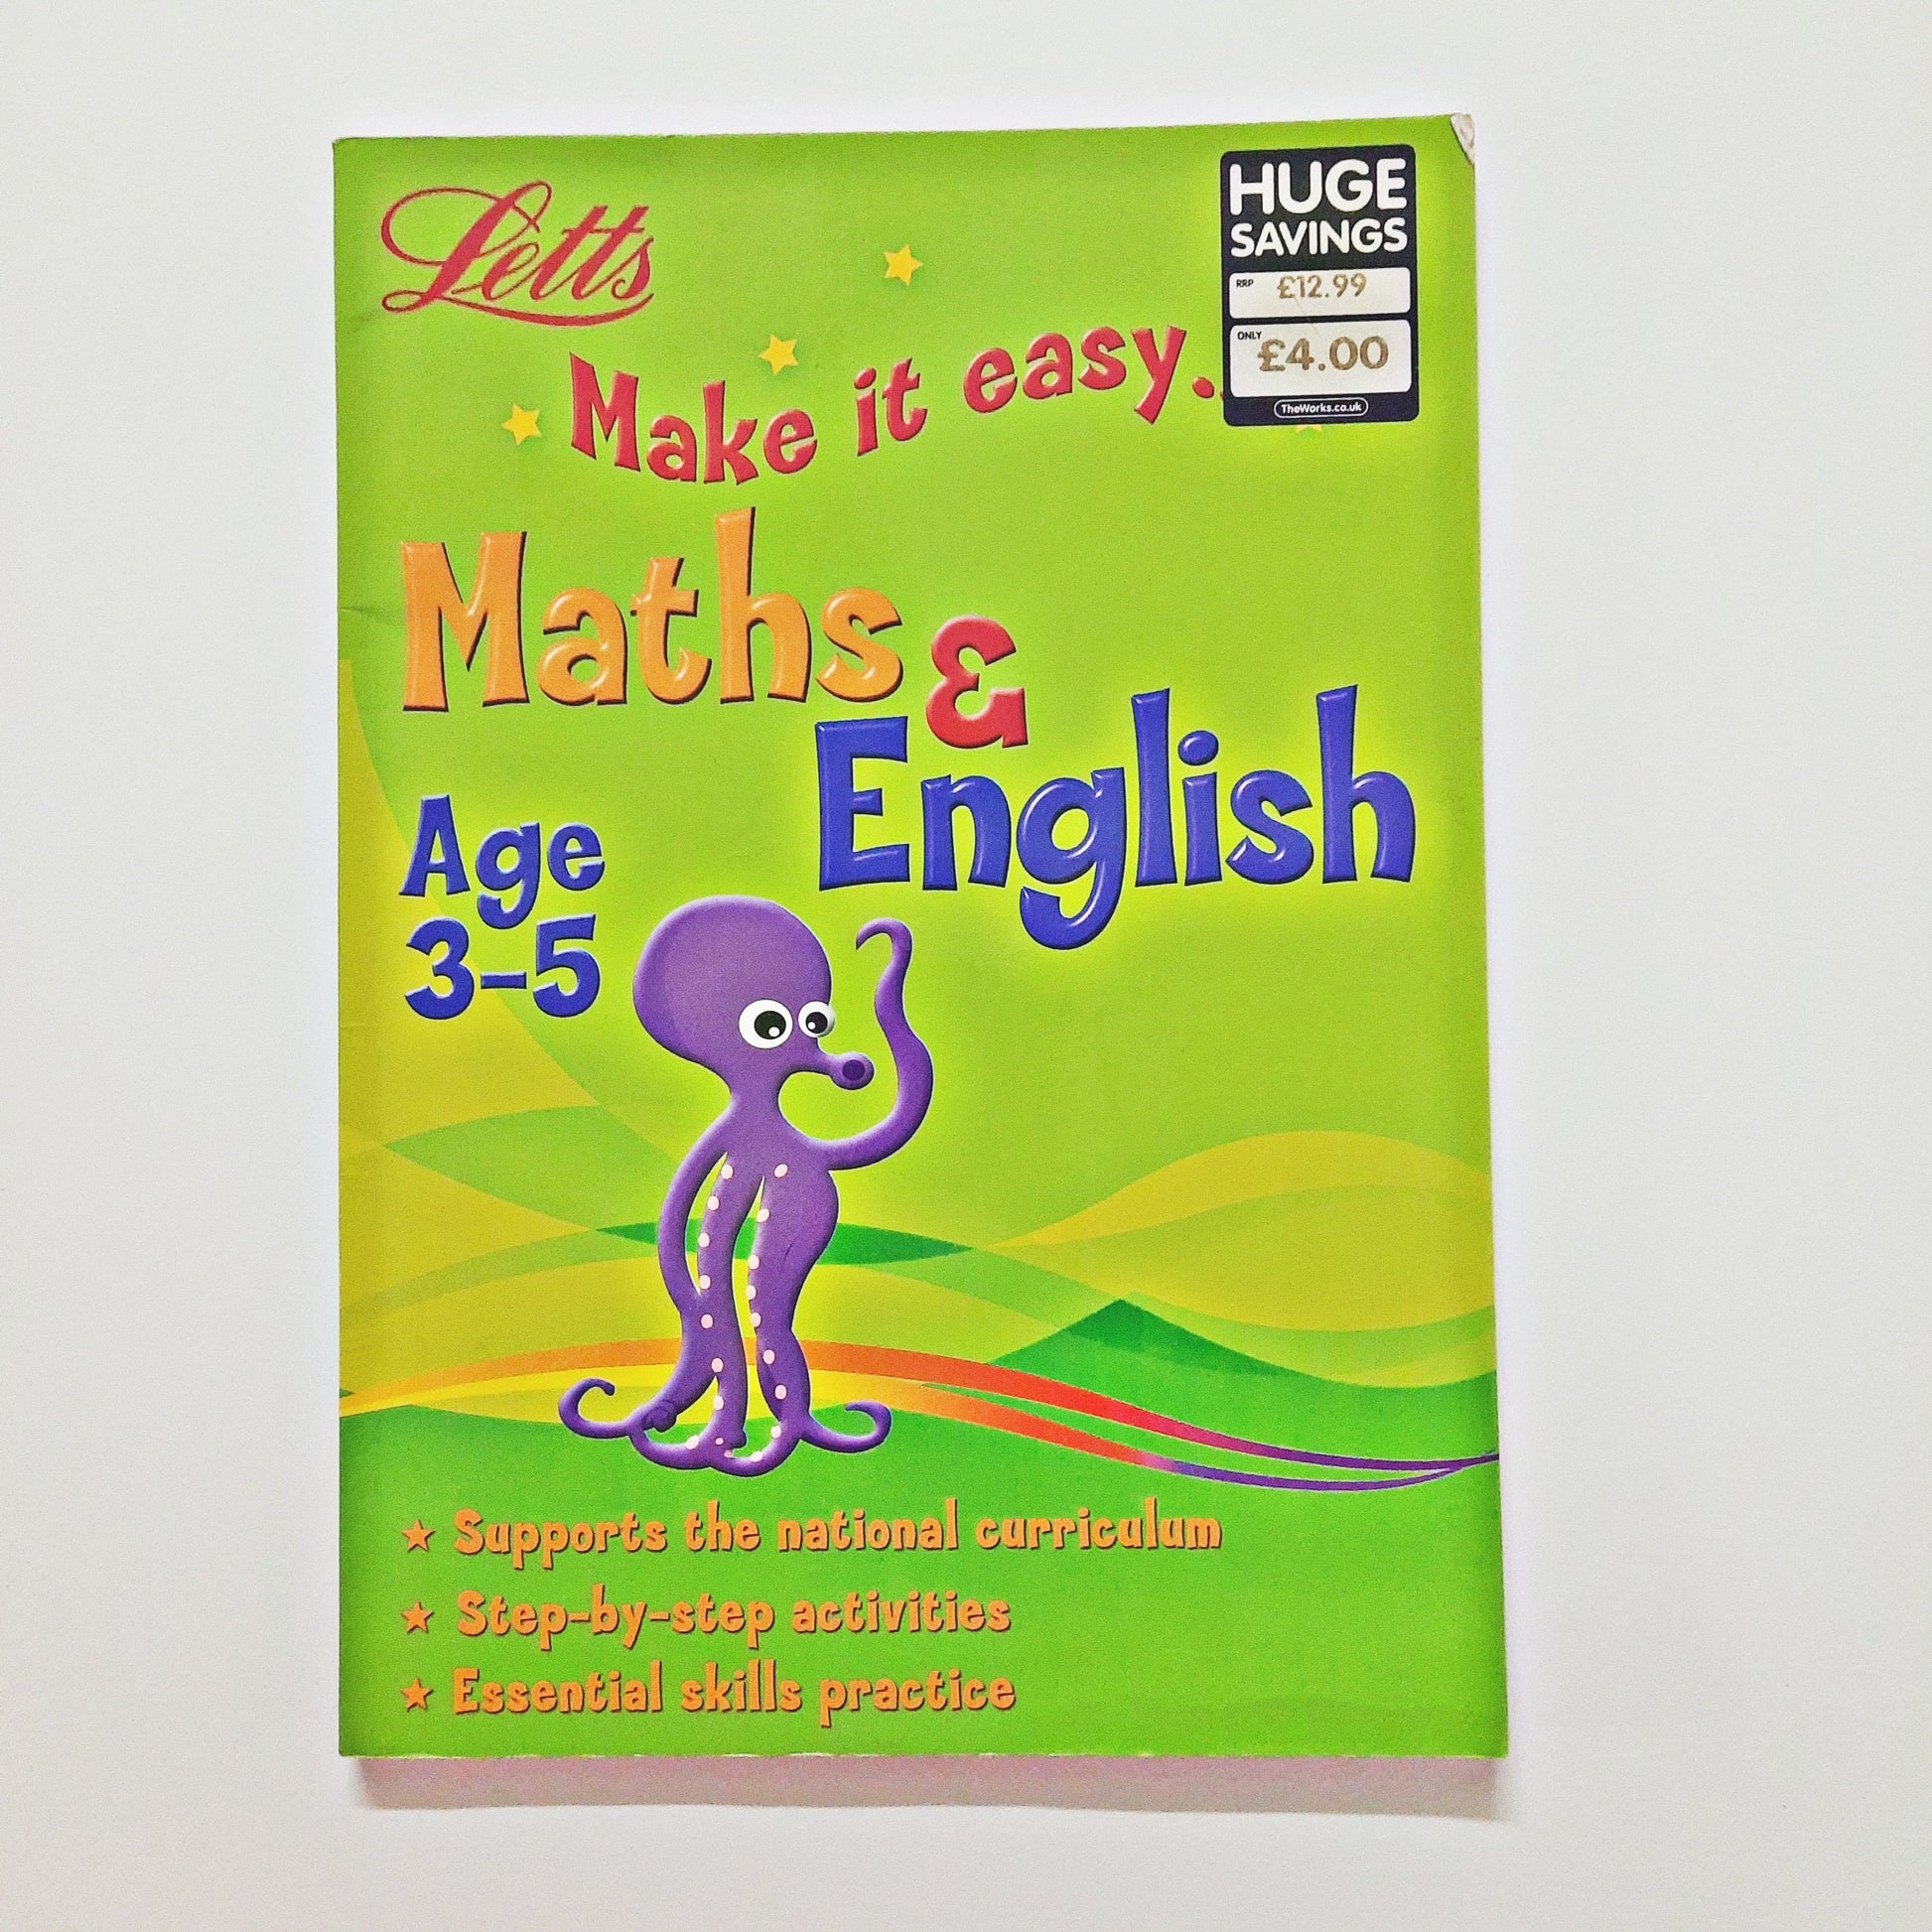 Make it easy - Maths and English